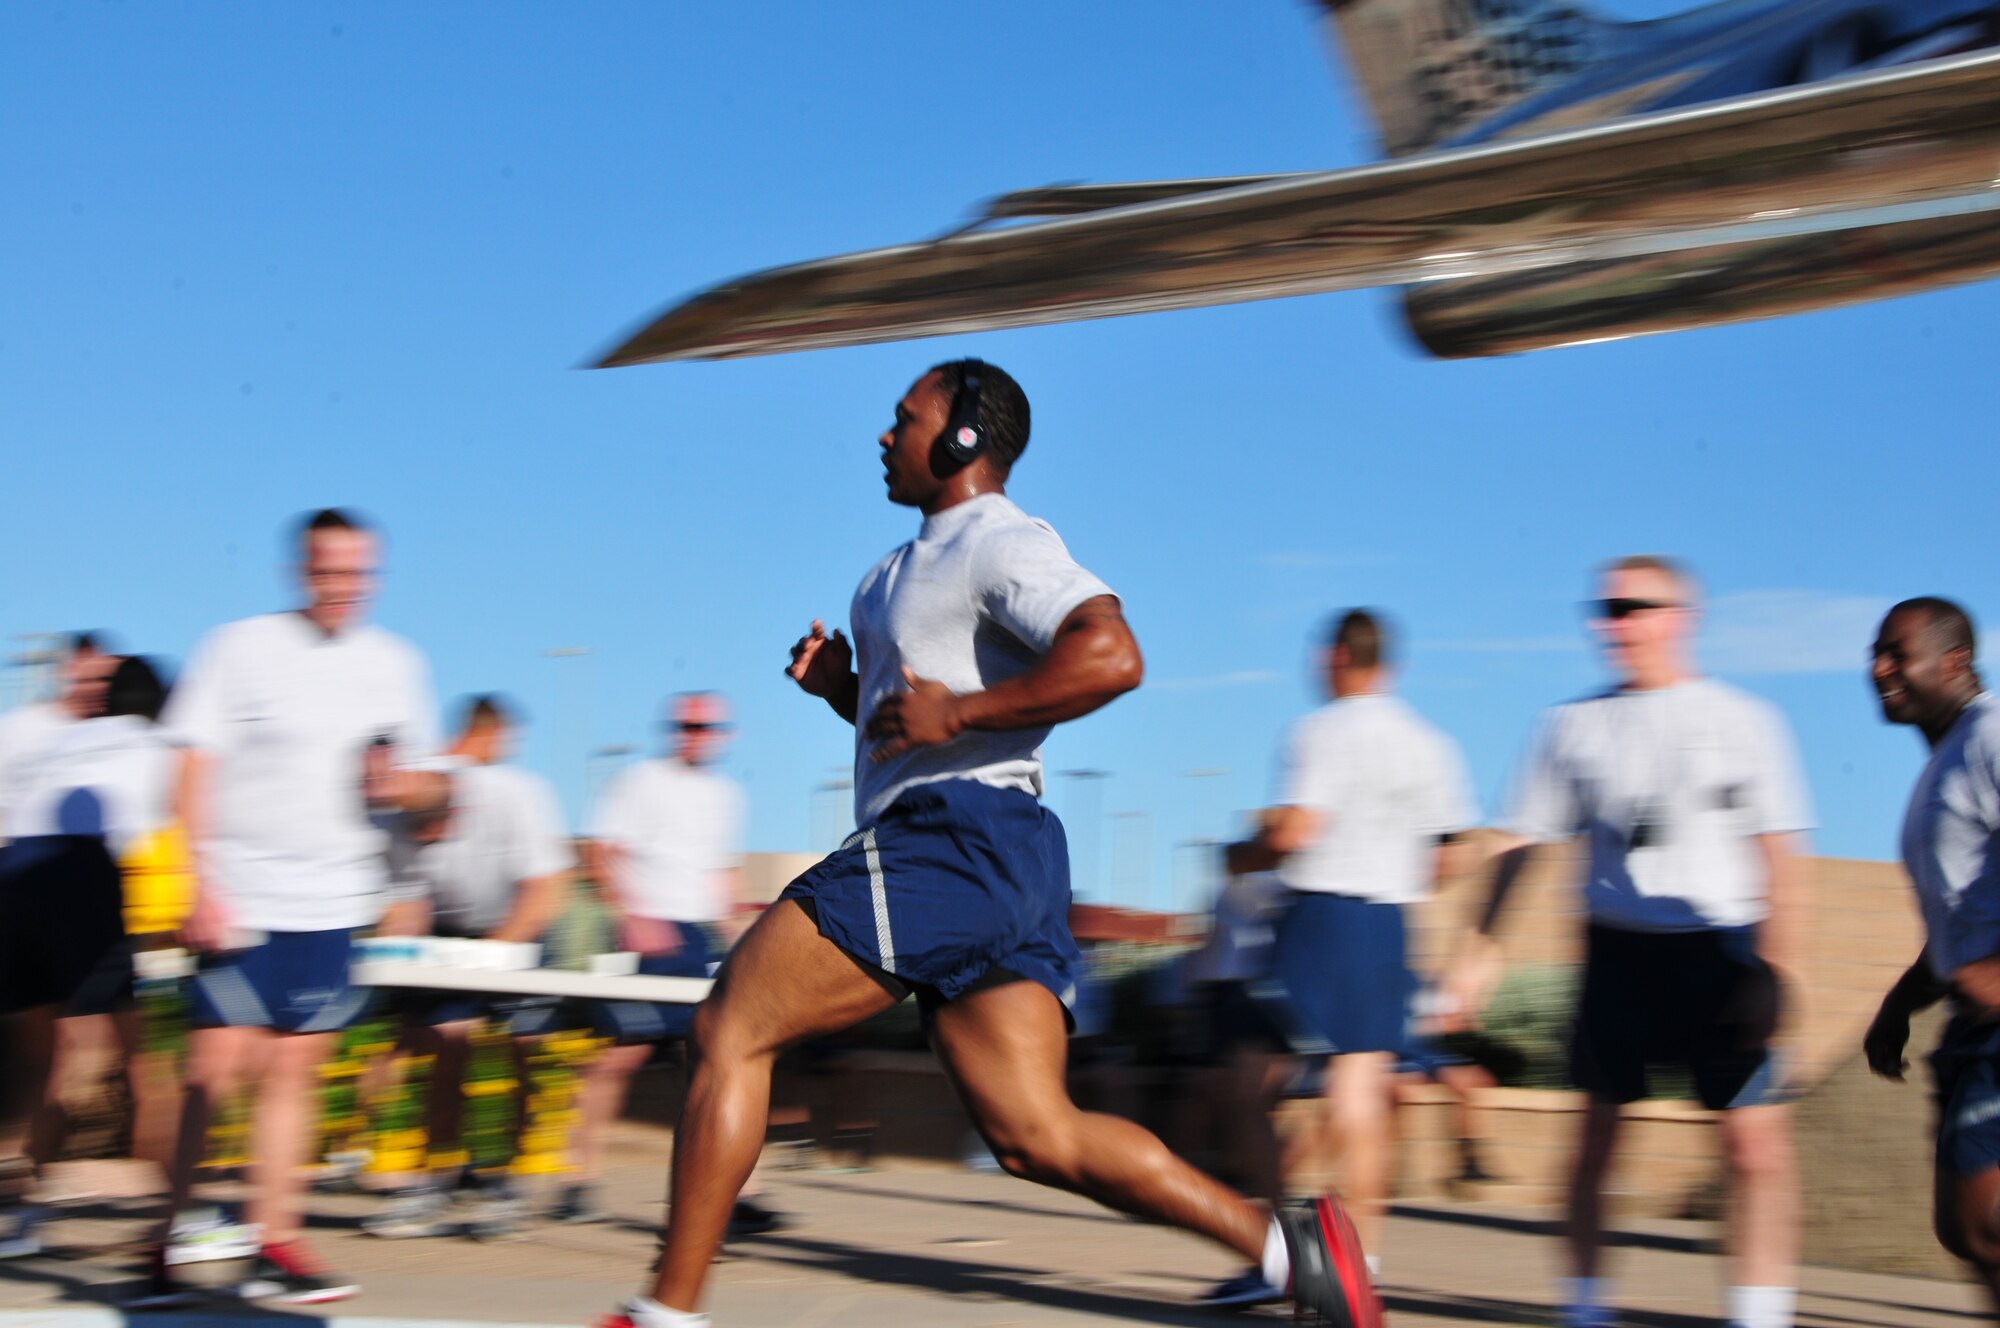 Airmen from the 161st Air Refueling Wing participate in their Air Force Physical fitness Test's 1.5-mile run. Rowing, biking, swimming and elliptical training can all develop endurance and have a positive impact to an Airman’s PFT score. (Courtesy photo by 161st Air refueling Wing)